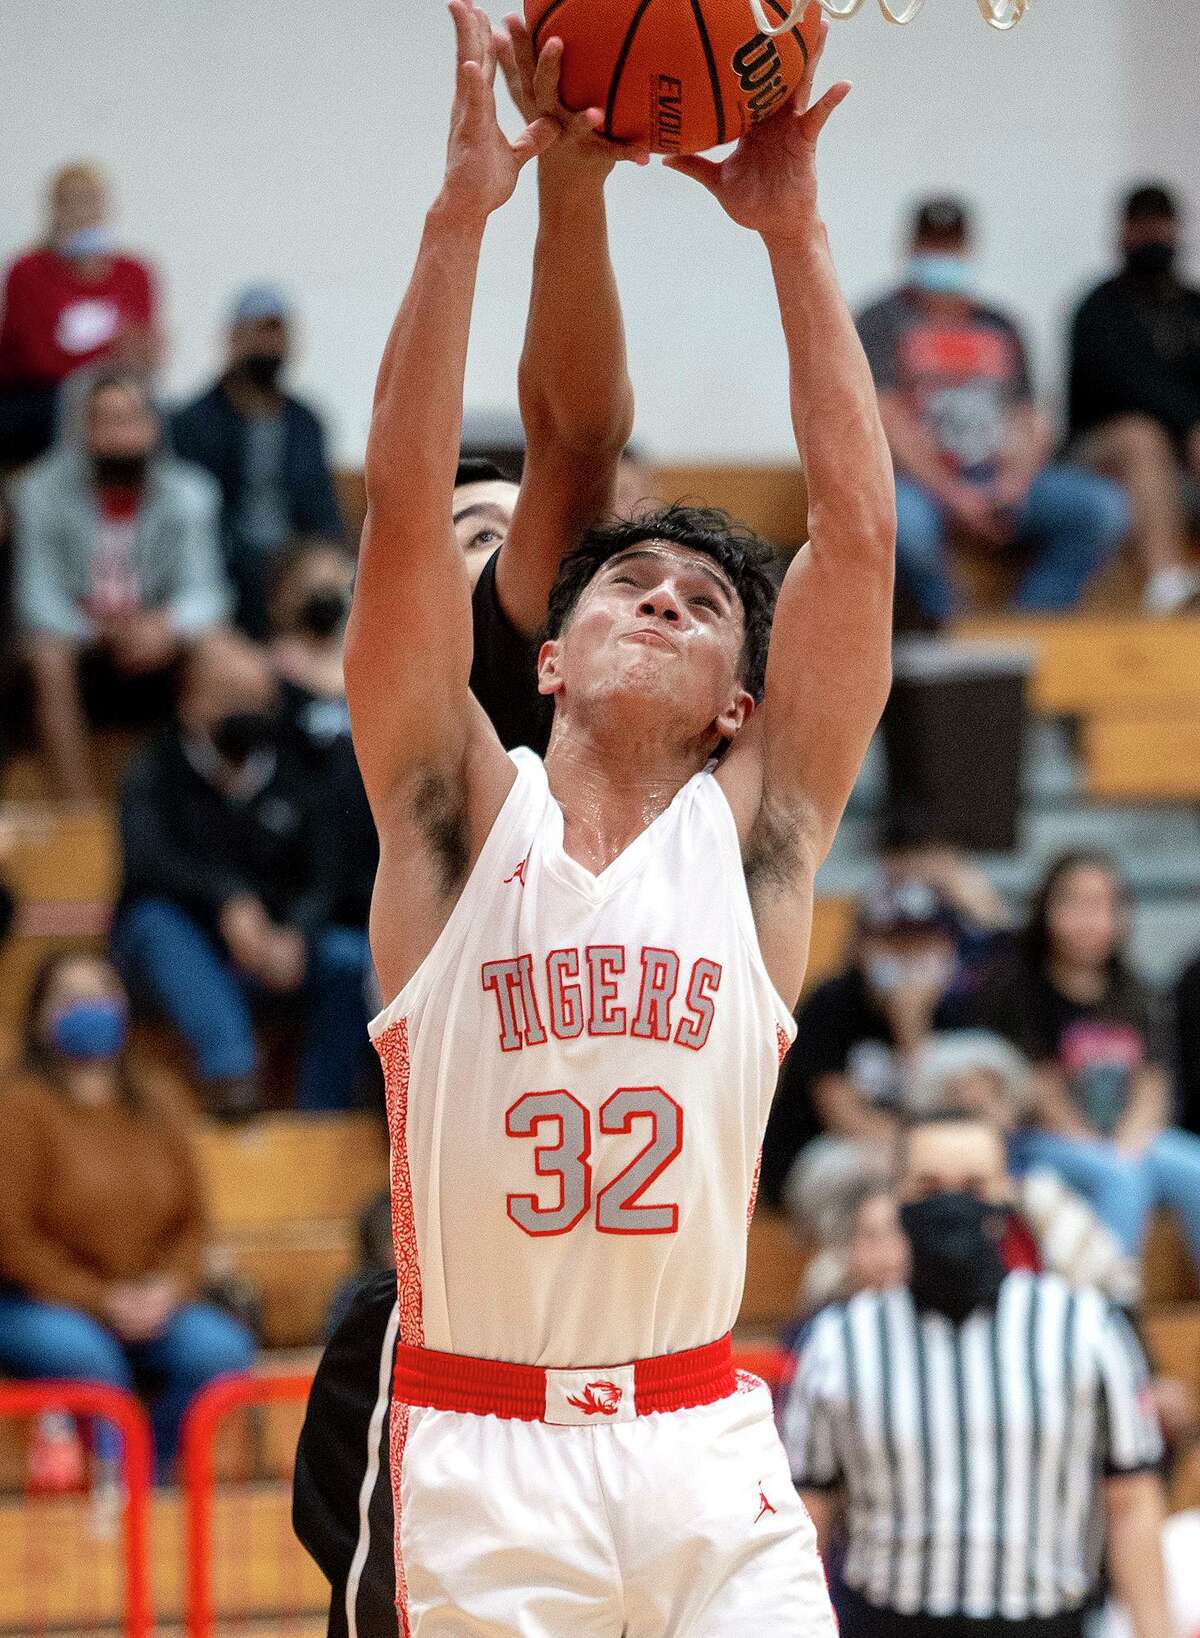 Martin High School’s Brandon Villarreal fights for a rebound during a game against United South High School Tuesday, Jan. 4, 2022 at Martin High School.